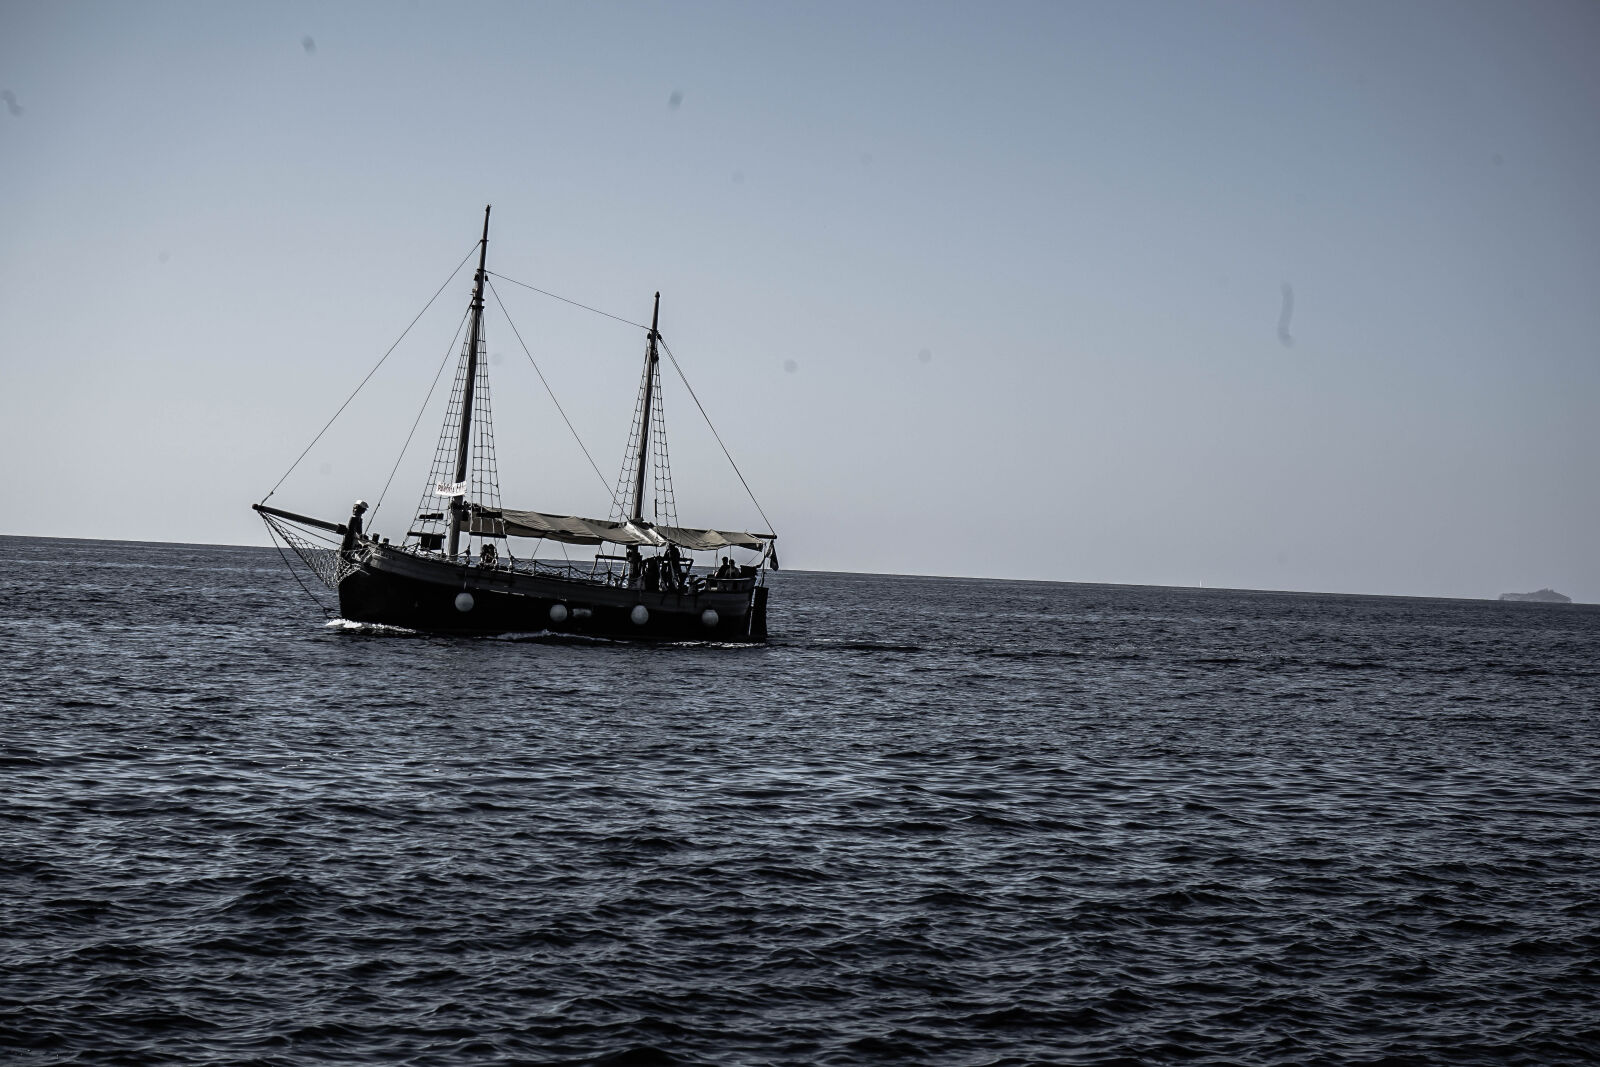 Sony a7 II sample photo. Boat, monchrome, ocean, pirates photography